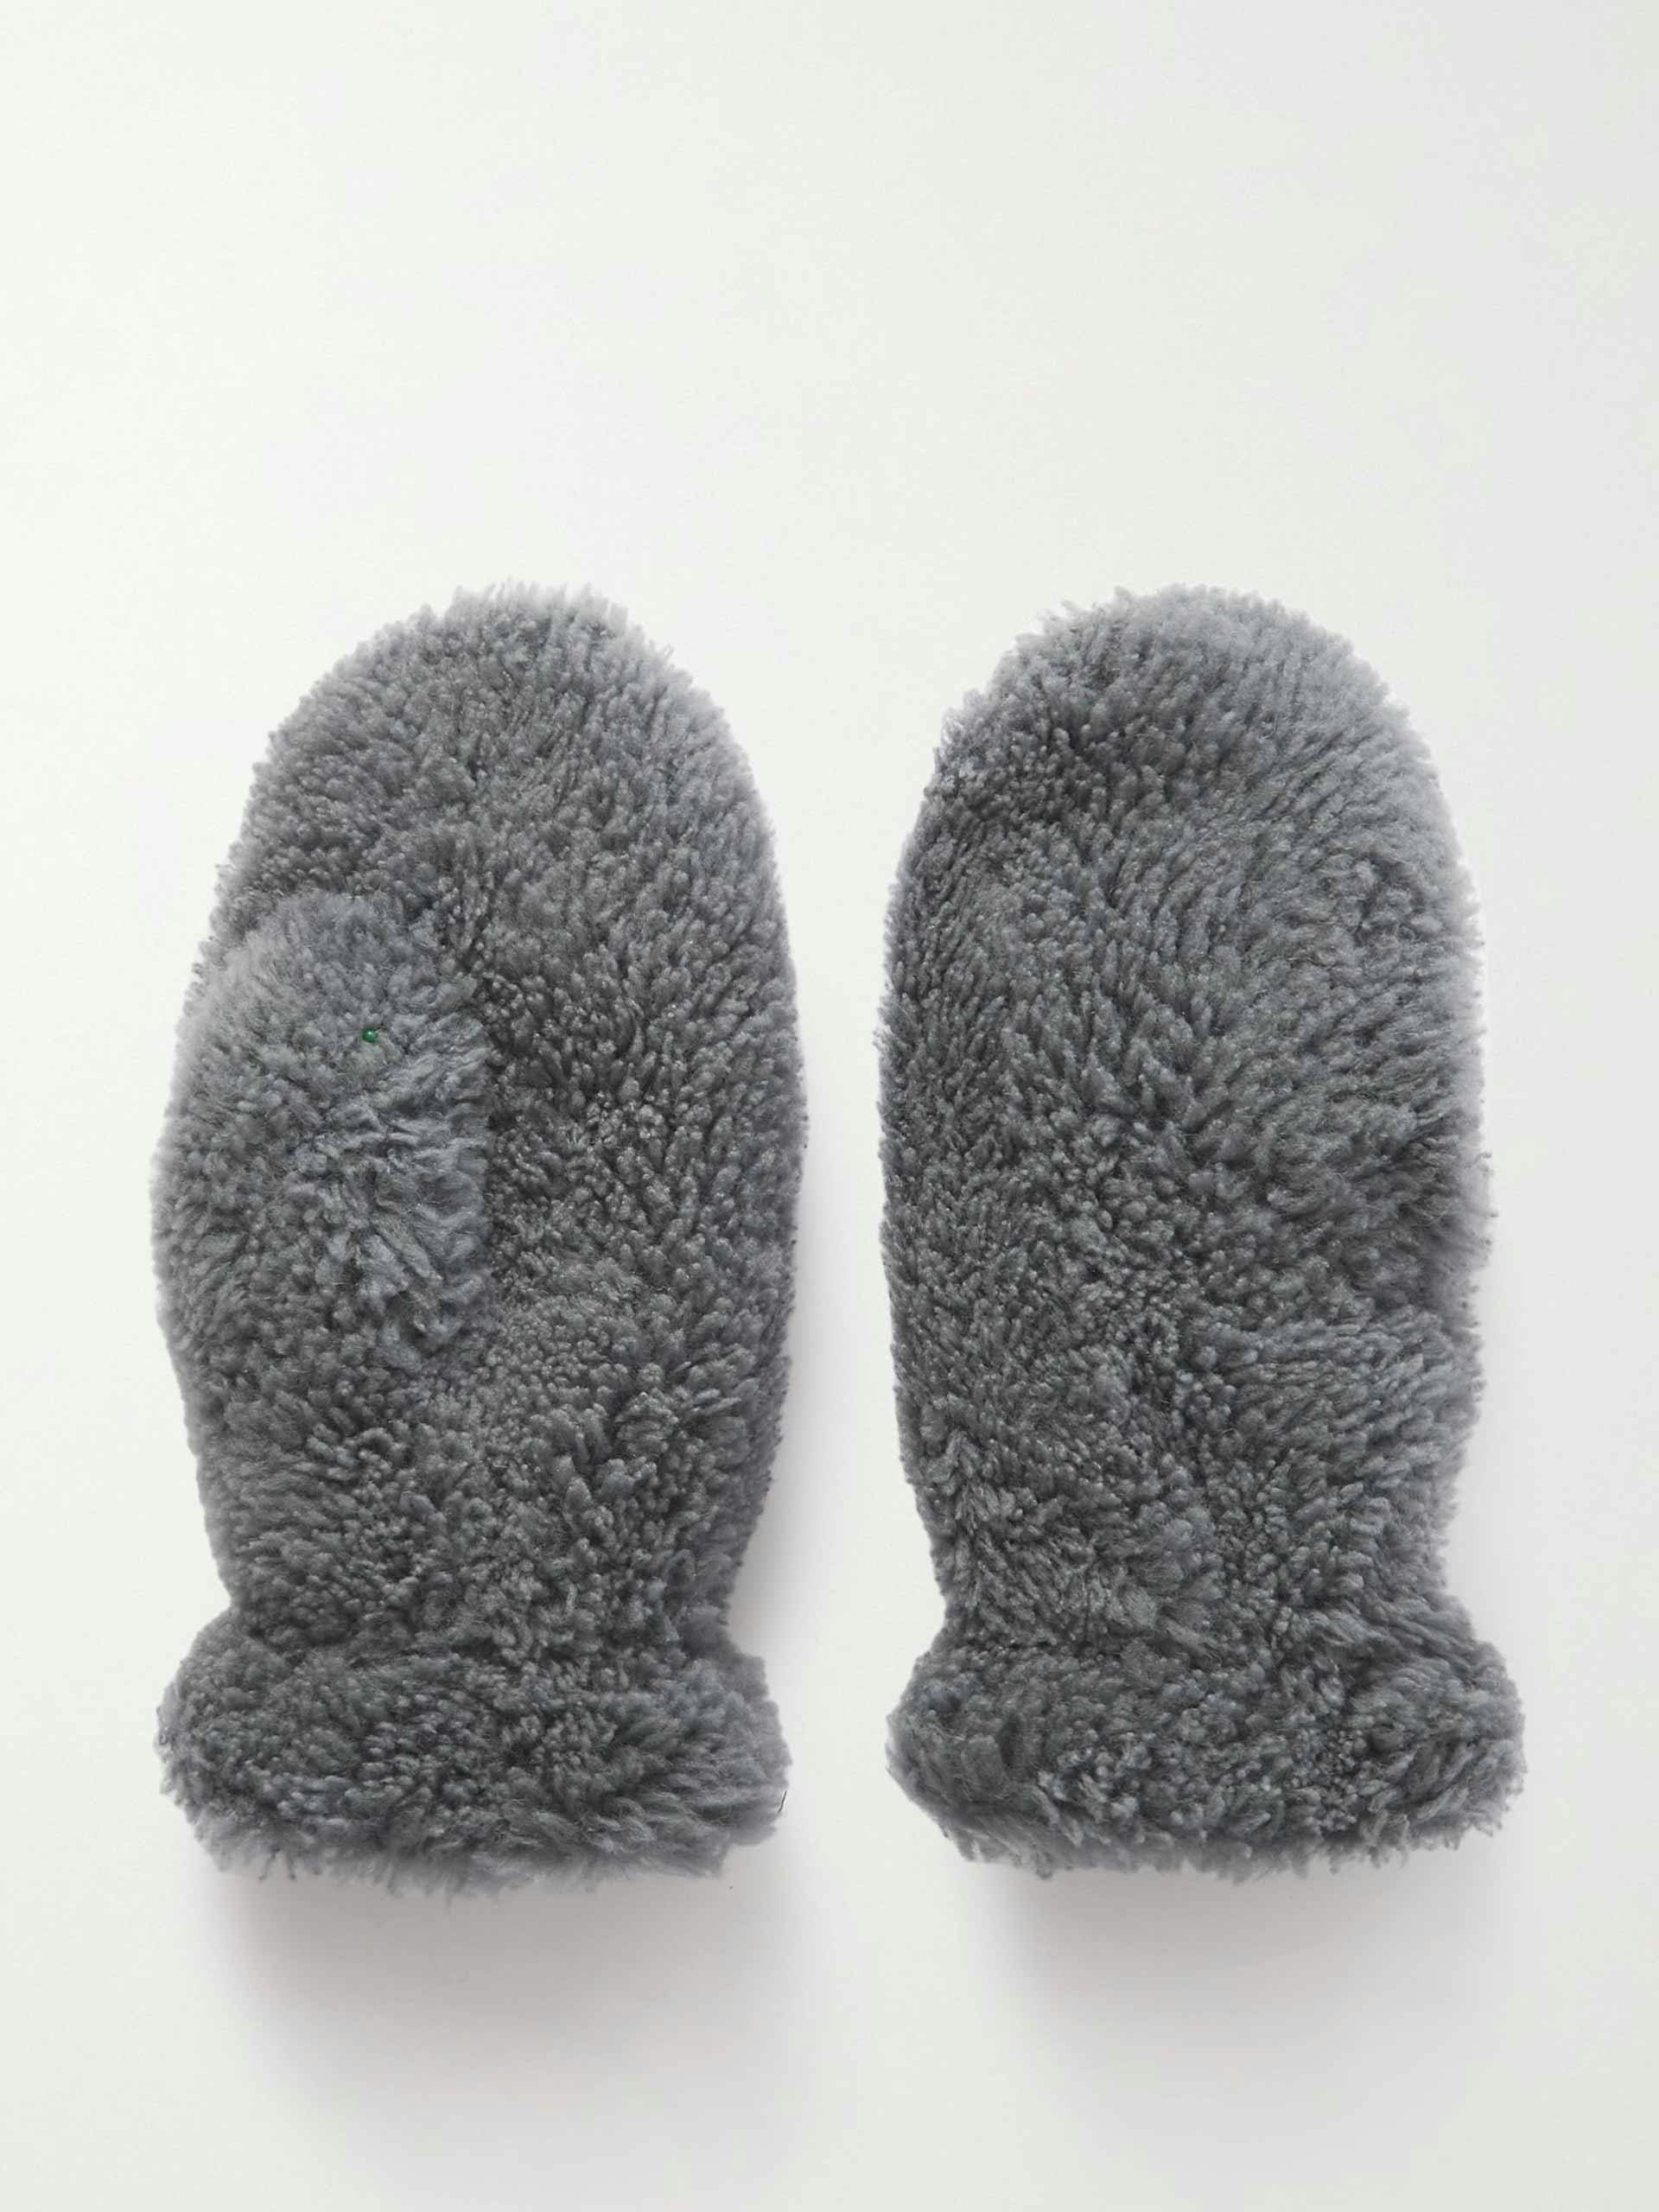 Padded shearling mittens